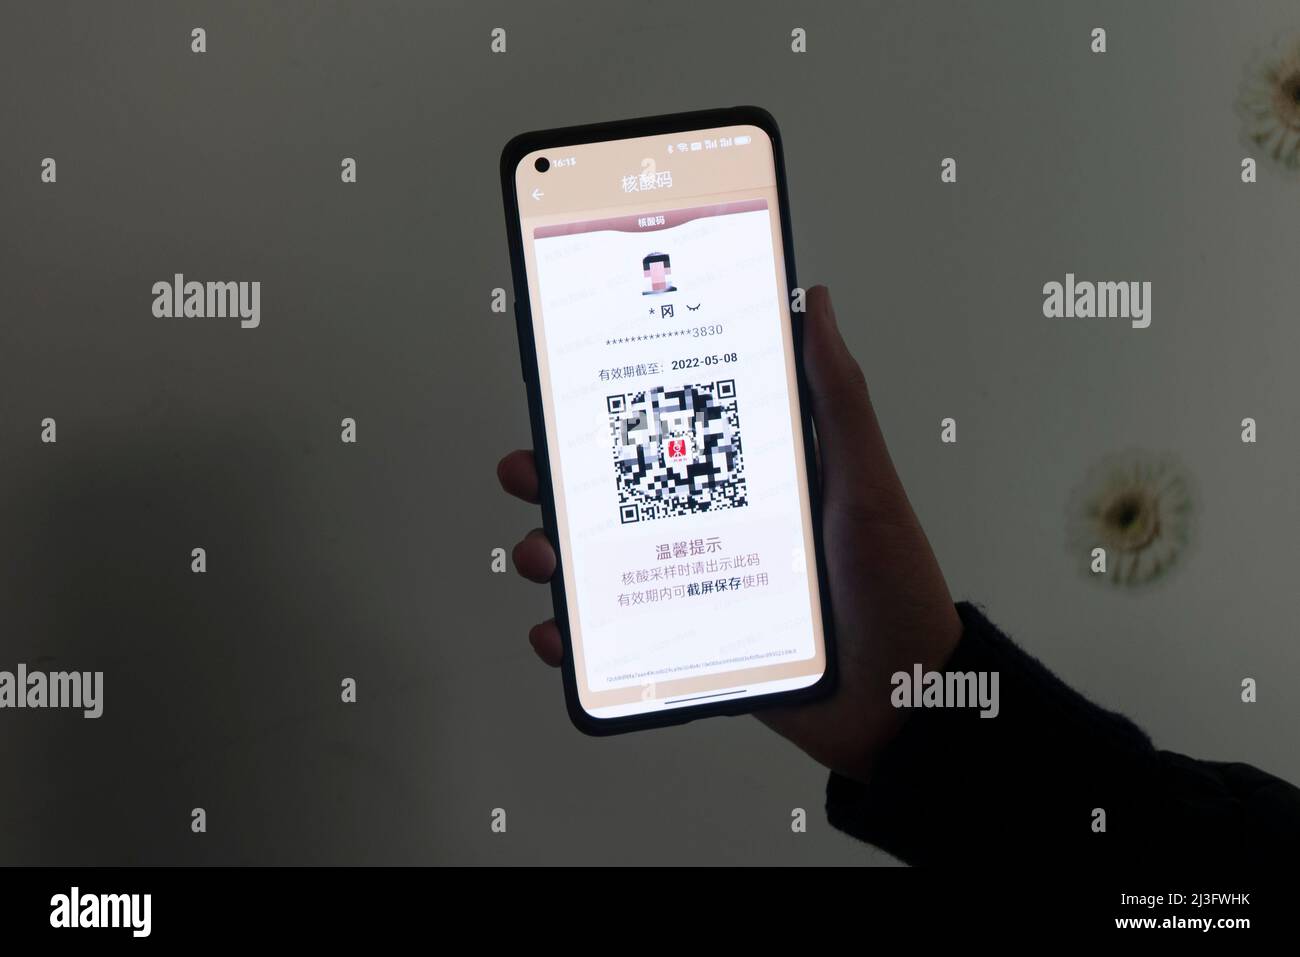 SHANGHAI, CHINA - APRIL 8, 2022 - A citizen holds a mobile phone to display  the nucleic acid code obtained from the citizen cloud app in Shanghai,  China, April 8, 2022. It